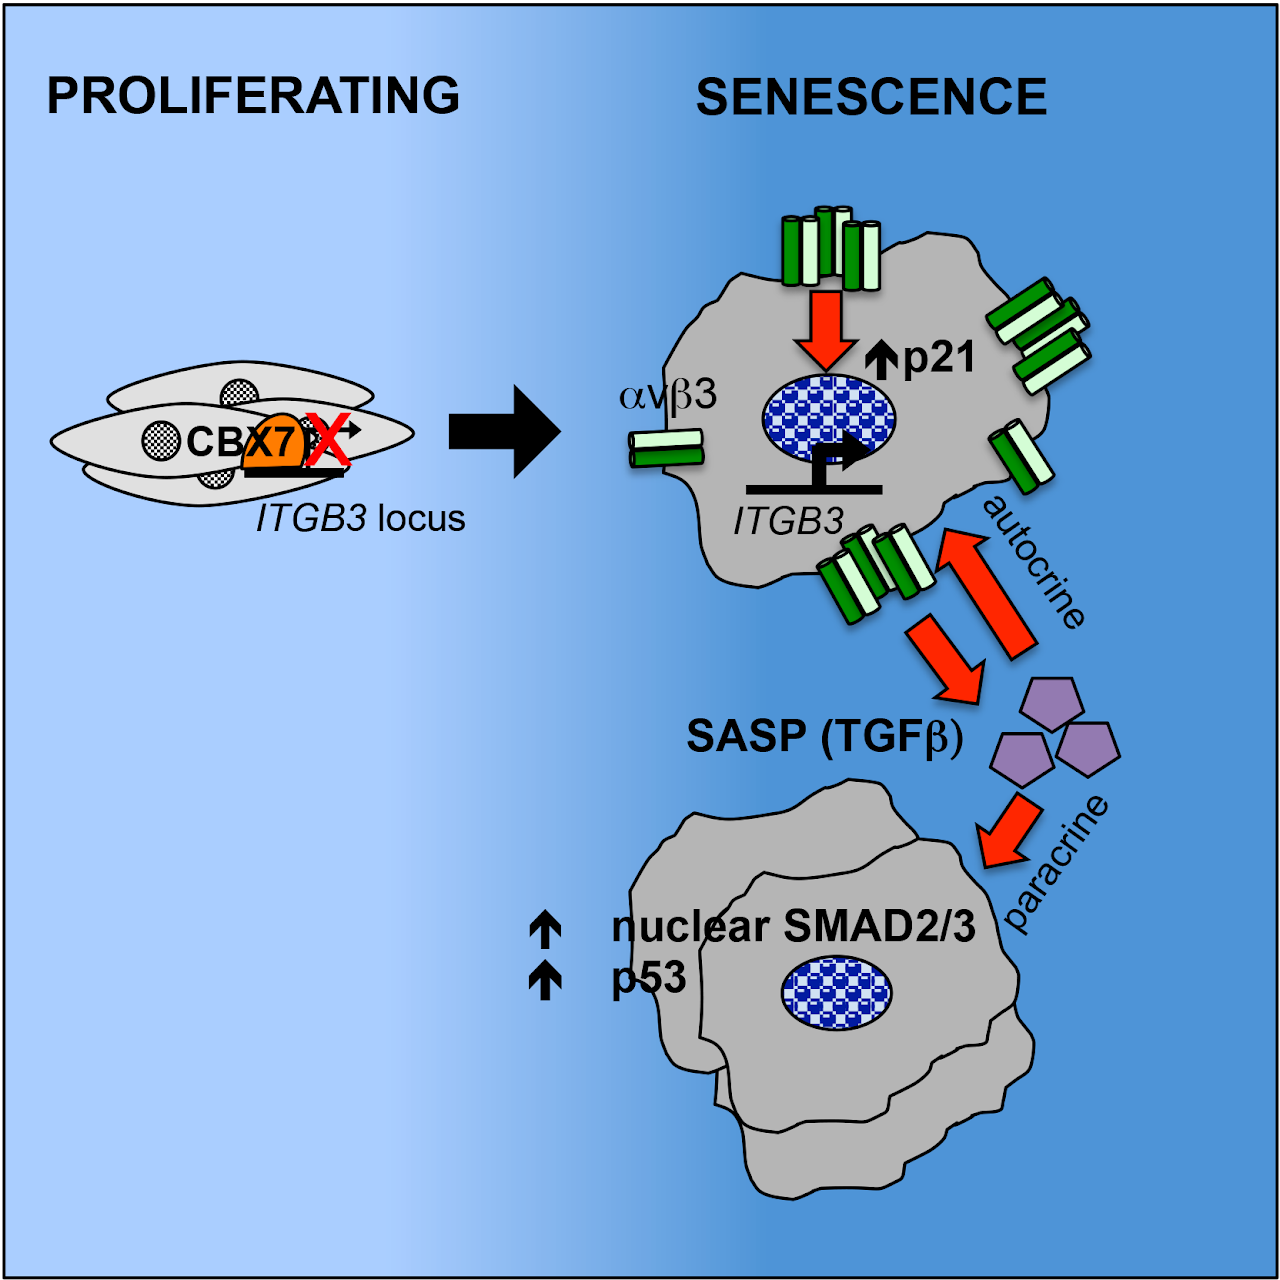 Figure 3. Integrin alpha-v- beta 3 (avb3) expression is upregulated during senescence. Upon activation of senescence integrin avb3 becomes highly expressed and directly activates TGFbeta (part of the SASP), which has both autocrine and paracrine effects on neighbouring cells.